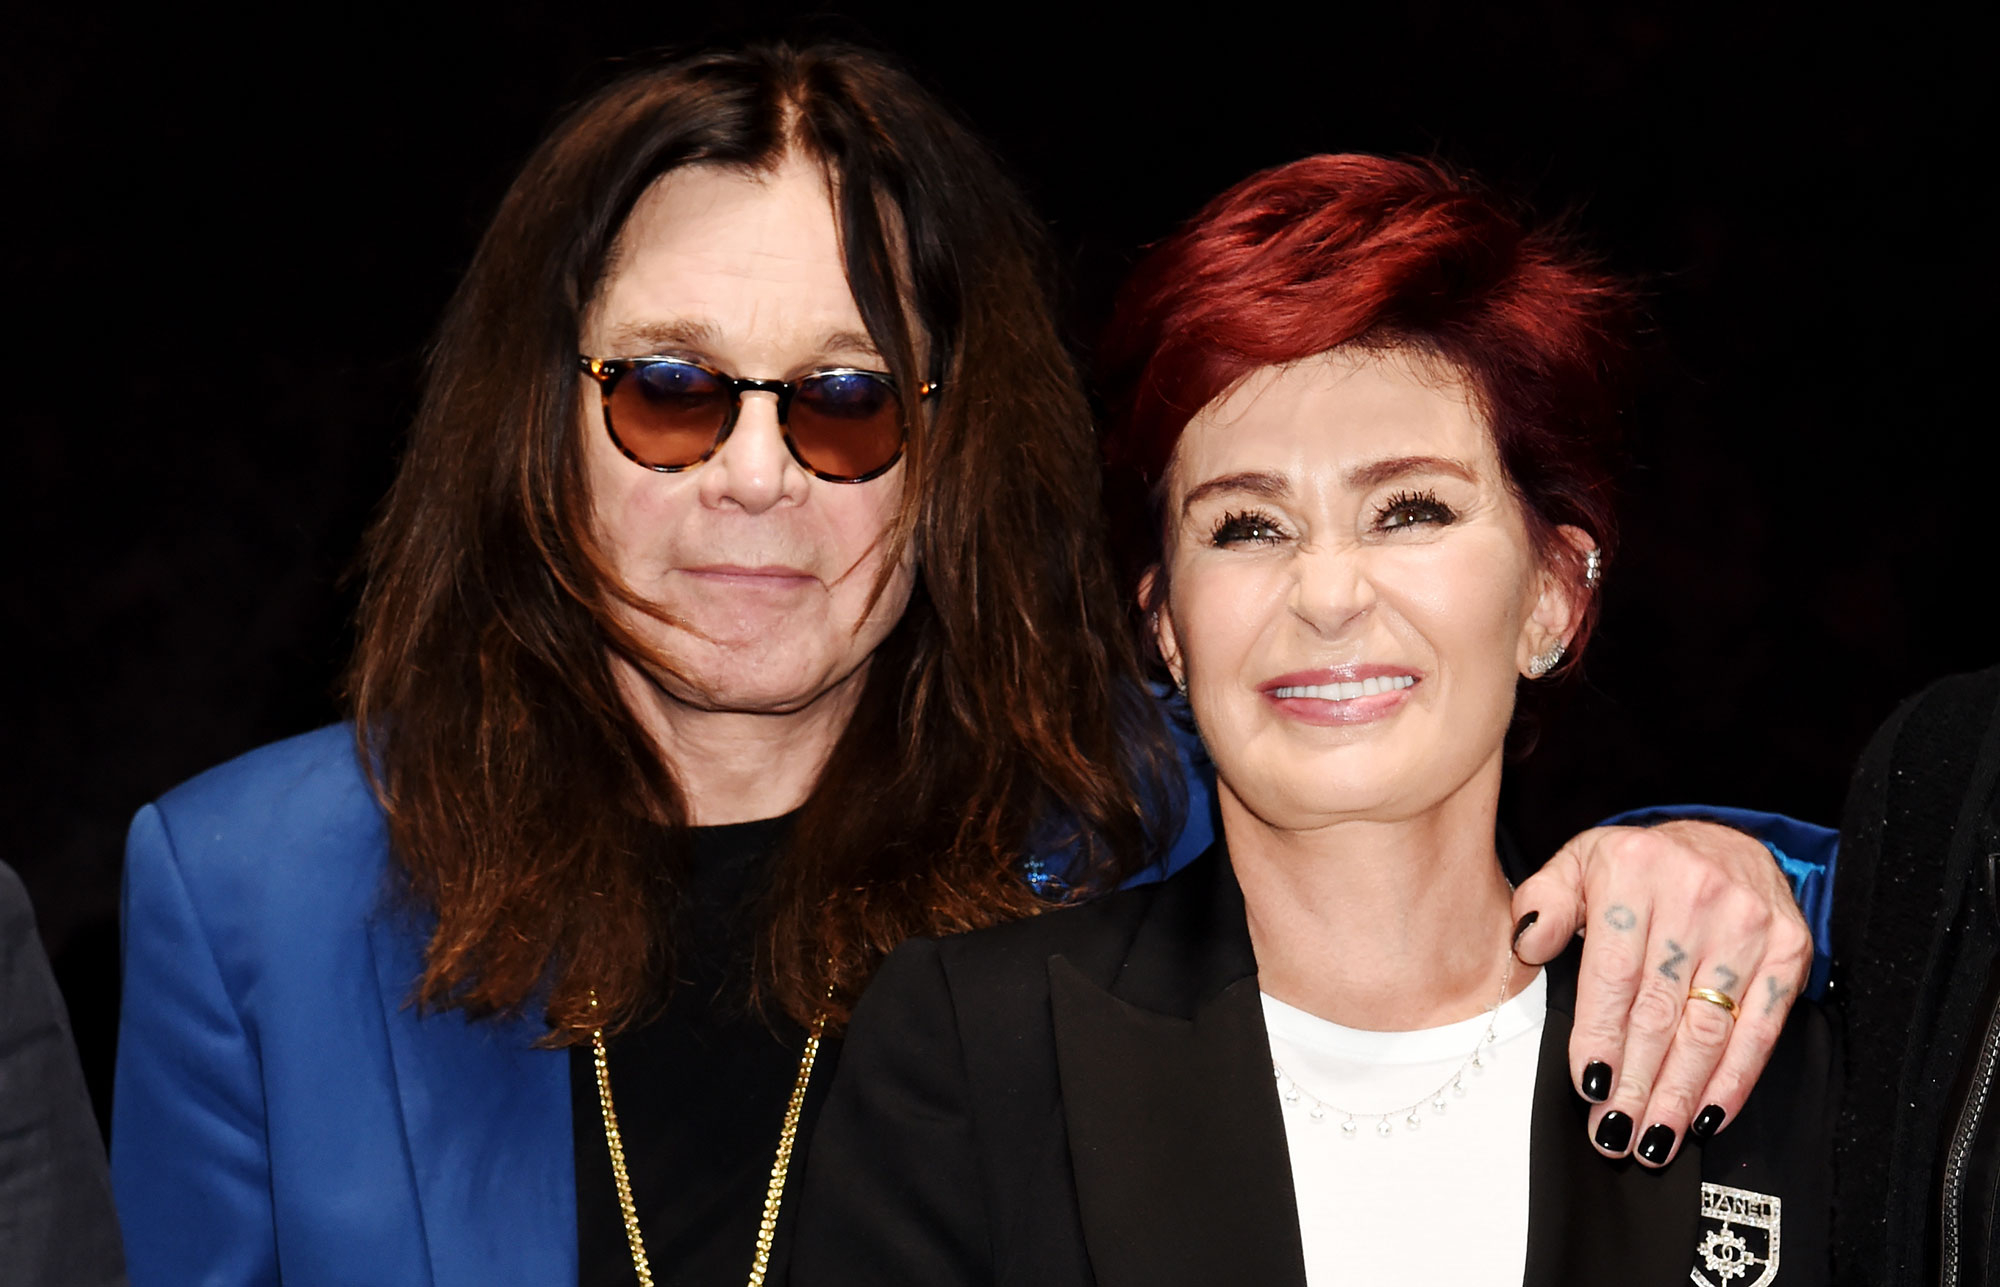 Ozzy Osbourne: Marriage With Sharon Is 'Back on Track'